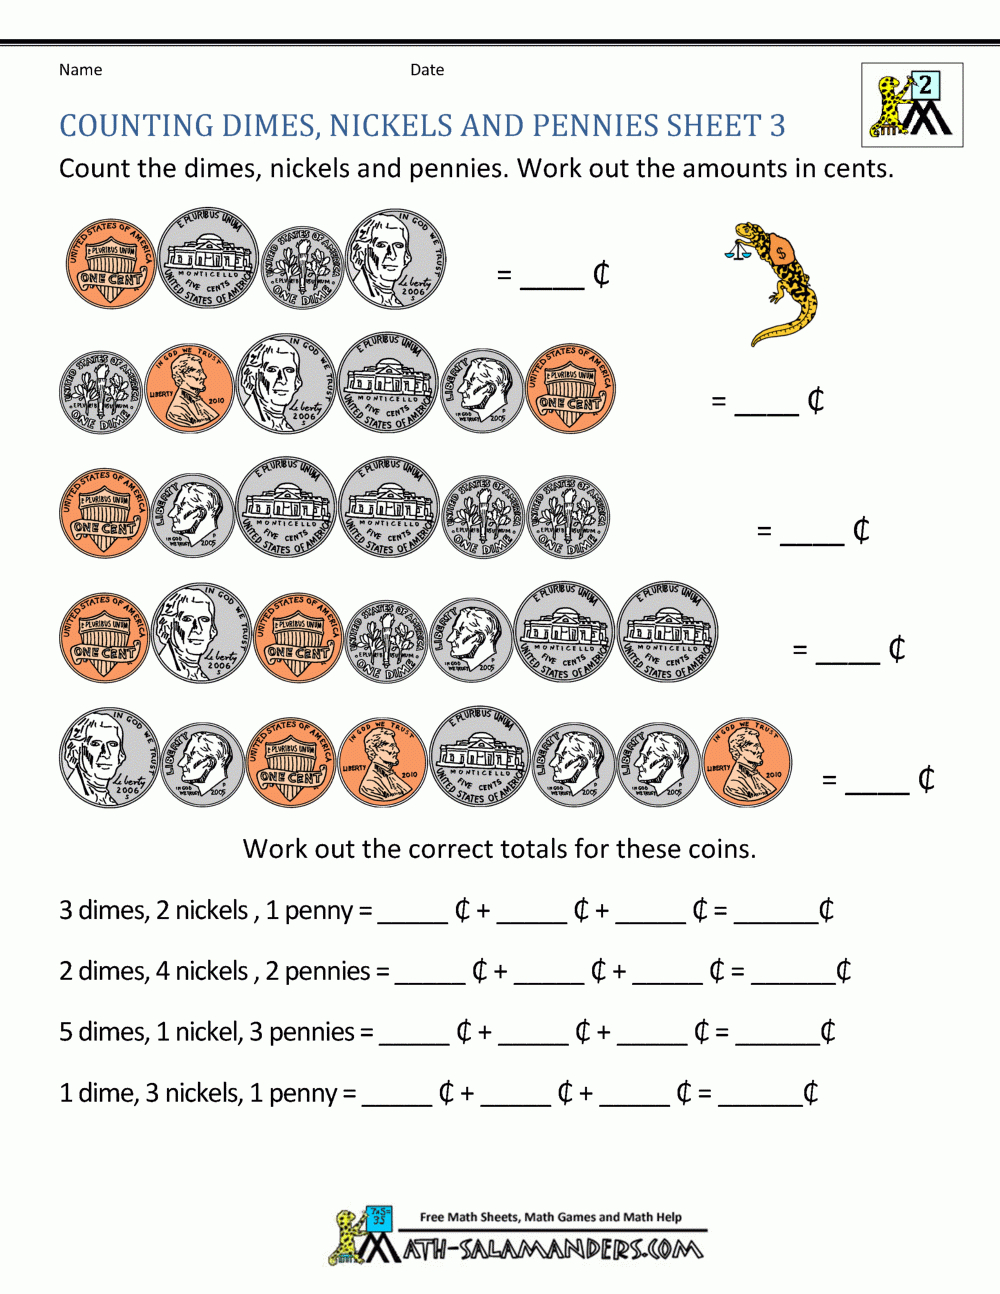 Money Worksheets For 2Nd Grade pertaining to Free Printable Counting Money Worksheets For 2Nd Grade